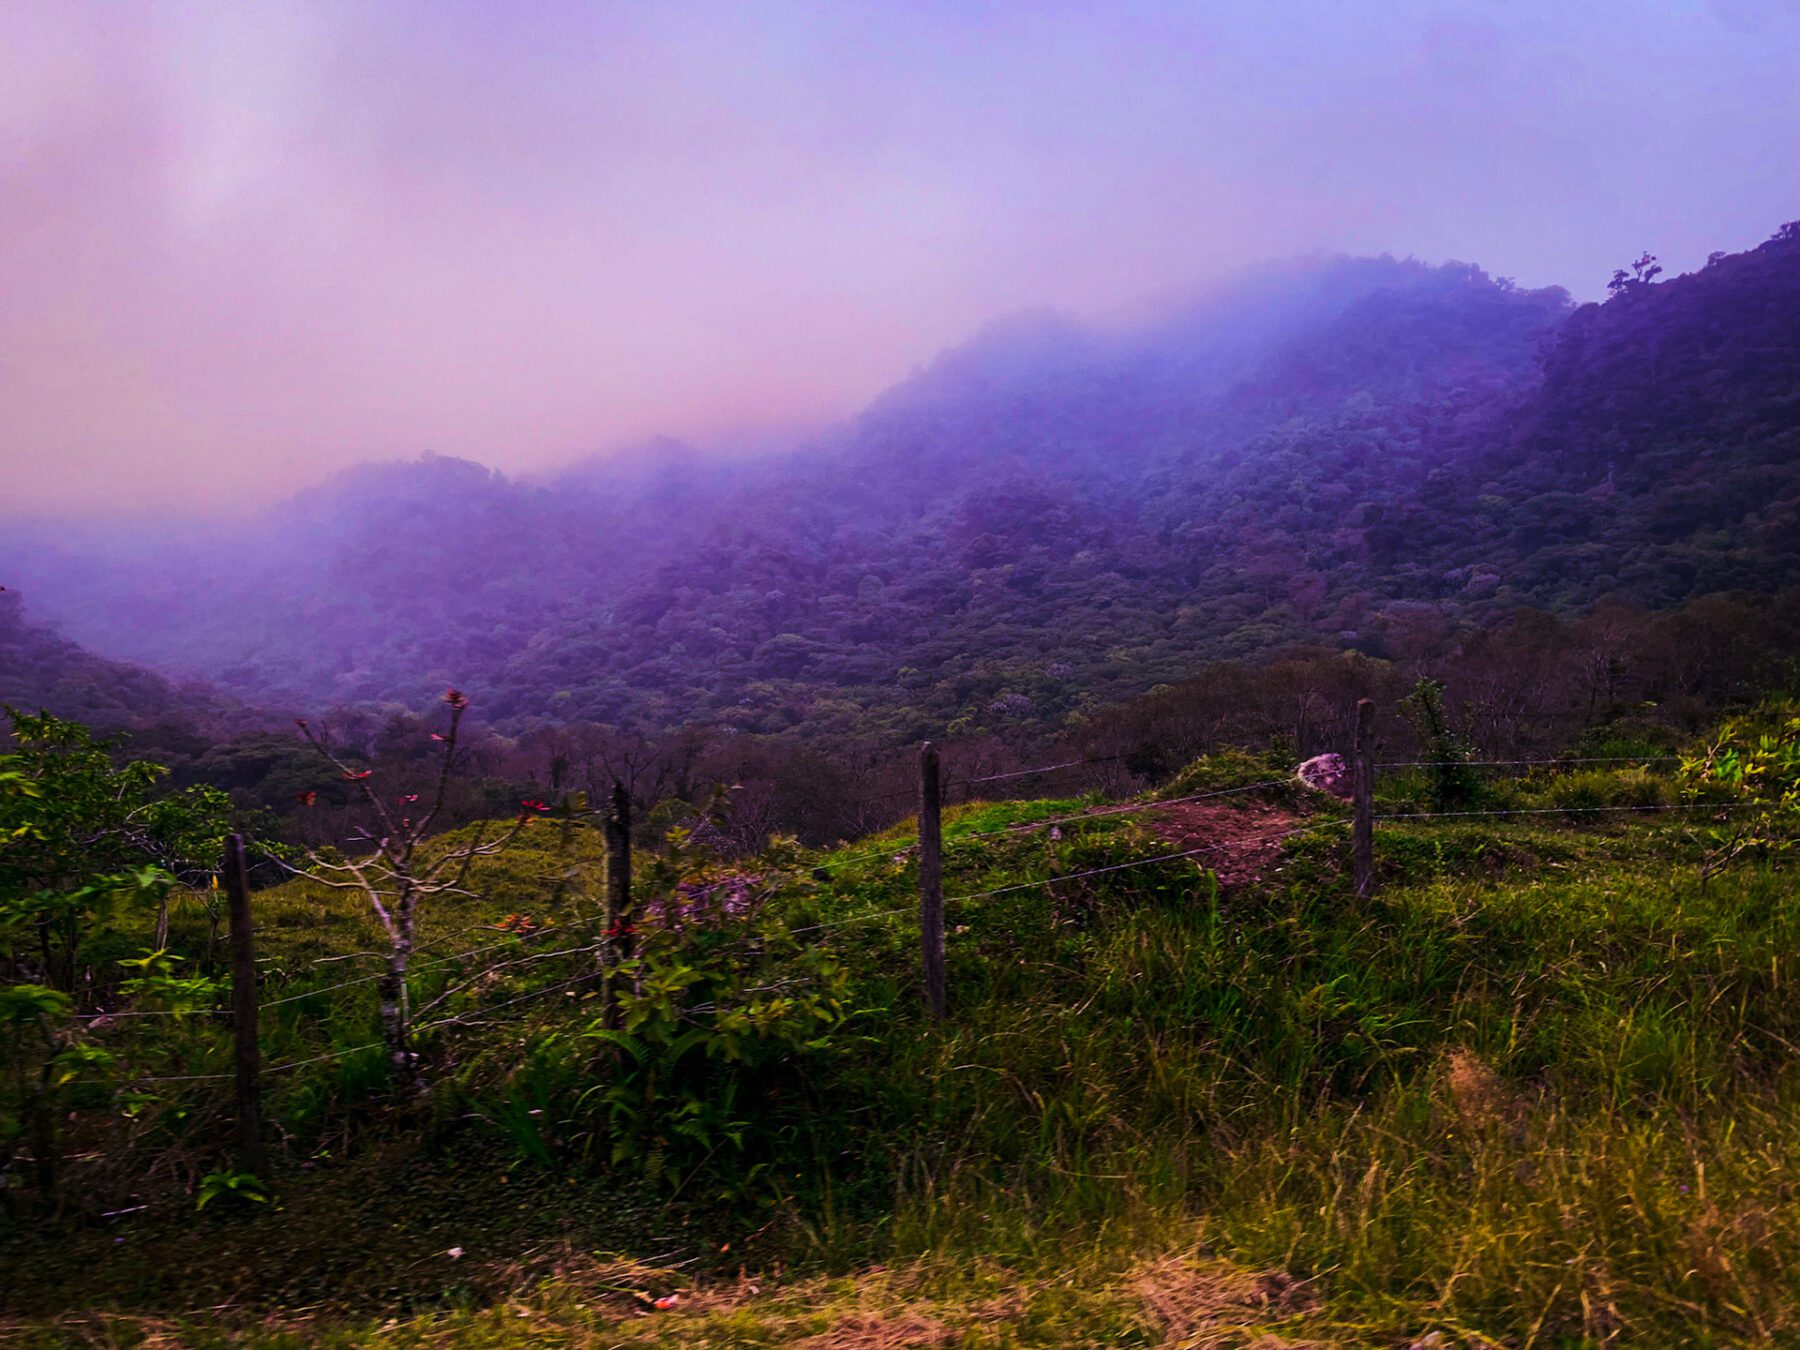 A misty Panama with a fence in the background.